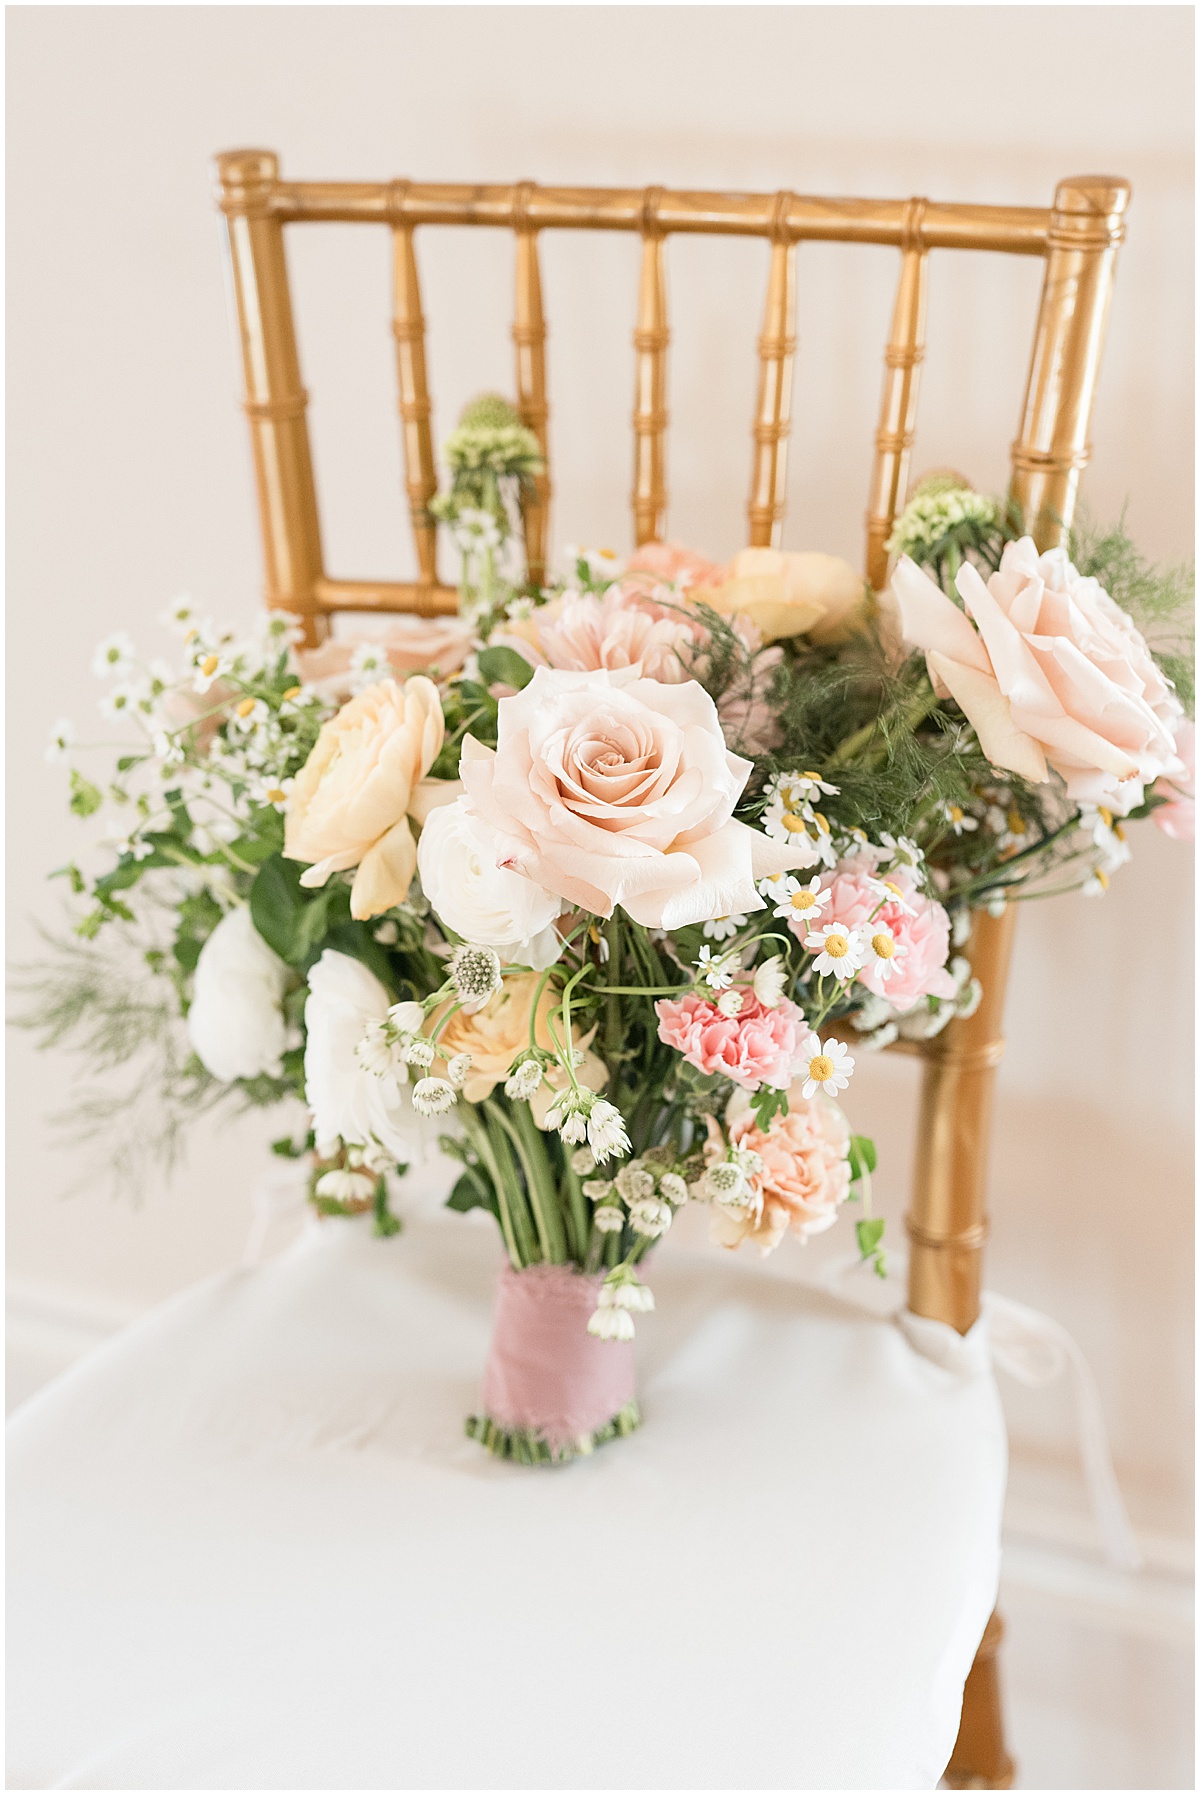 Summer-inspired decor for a Ritz Charles Chapel wedding in Carmel, Indiana